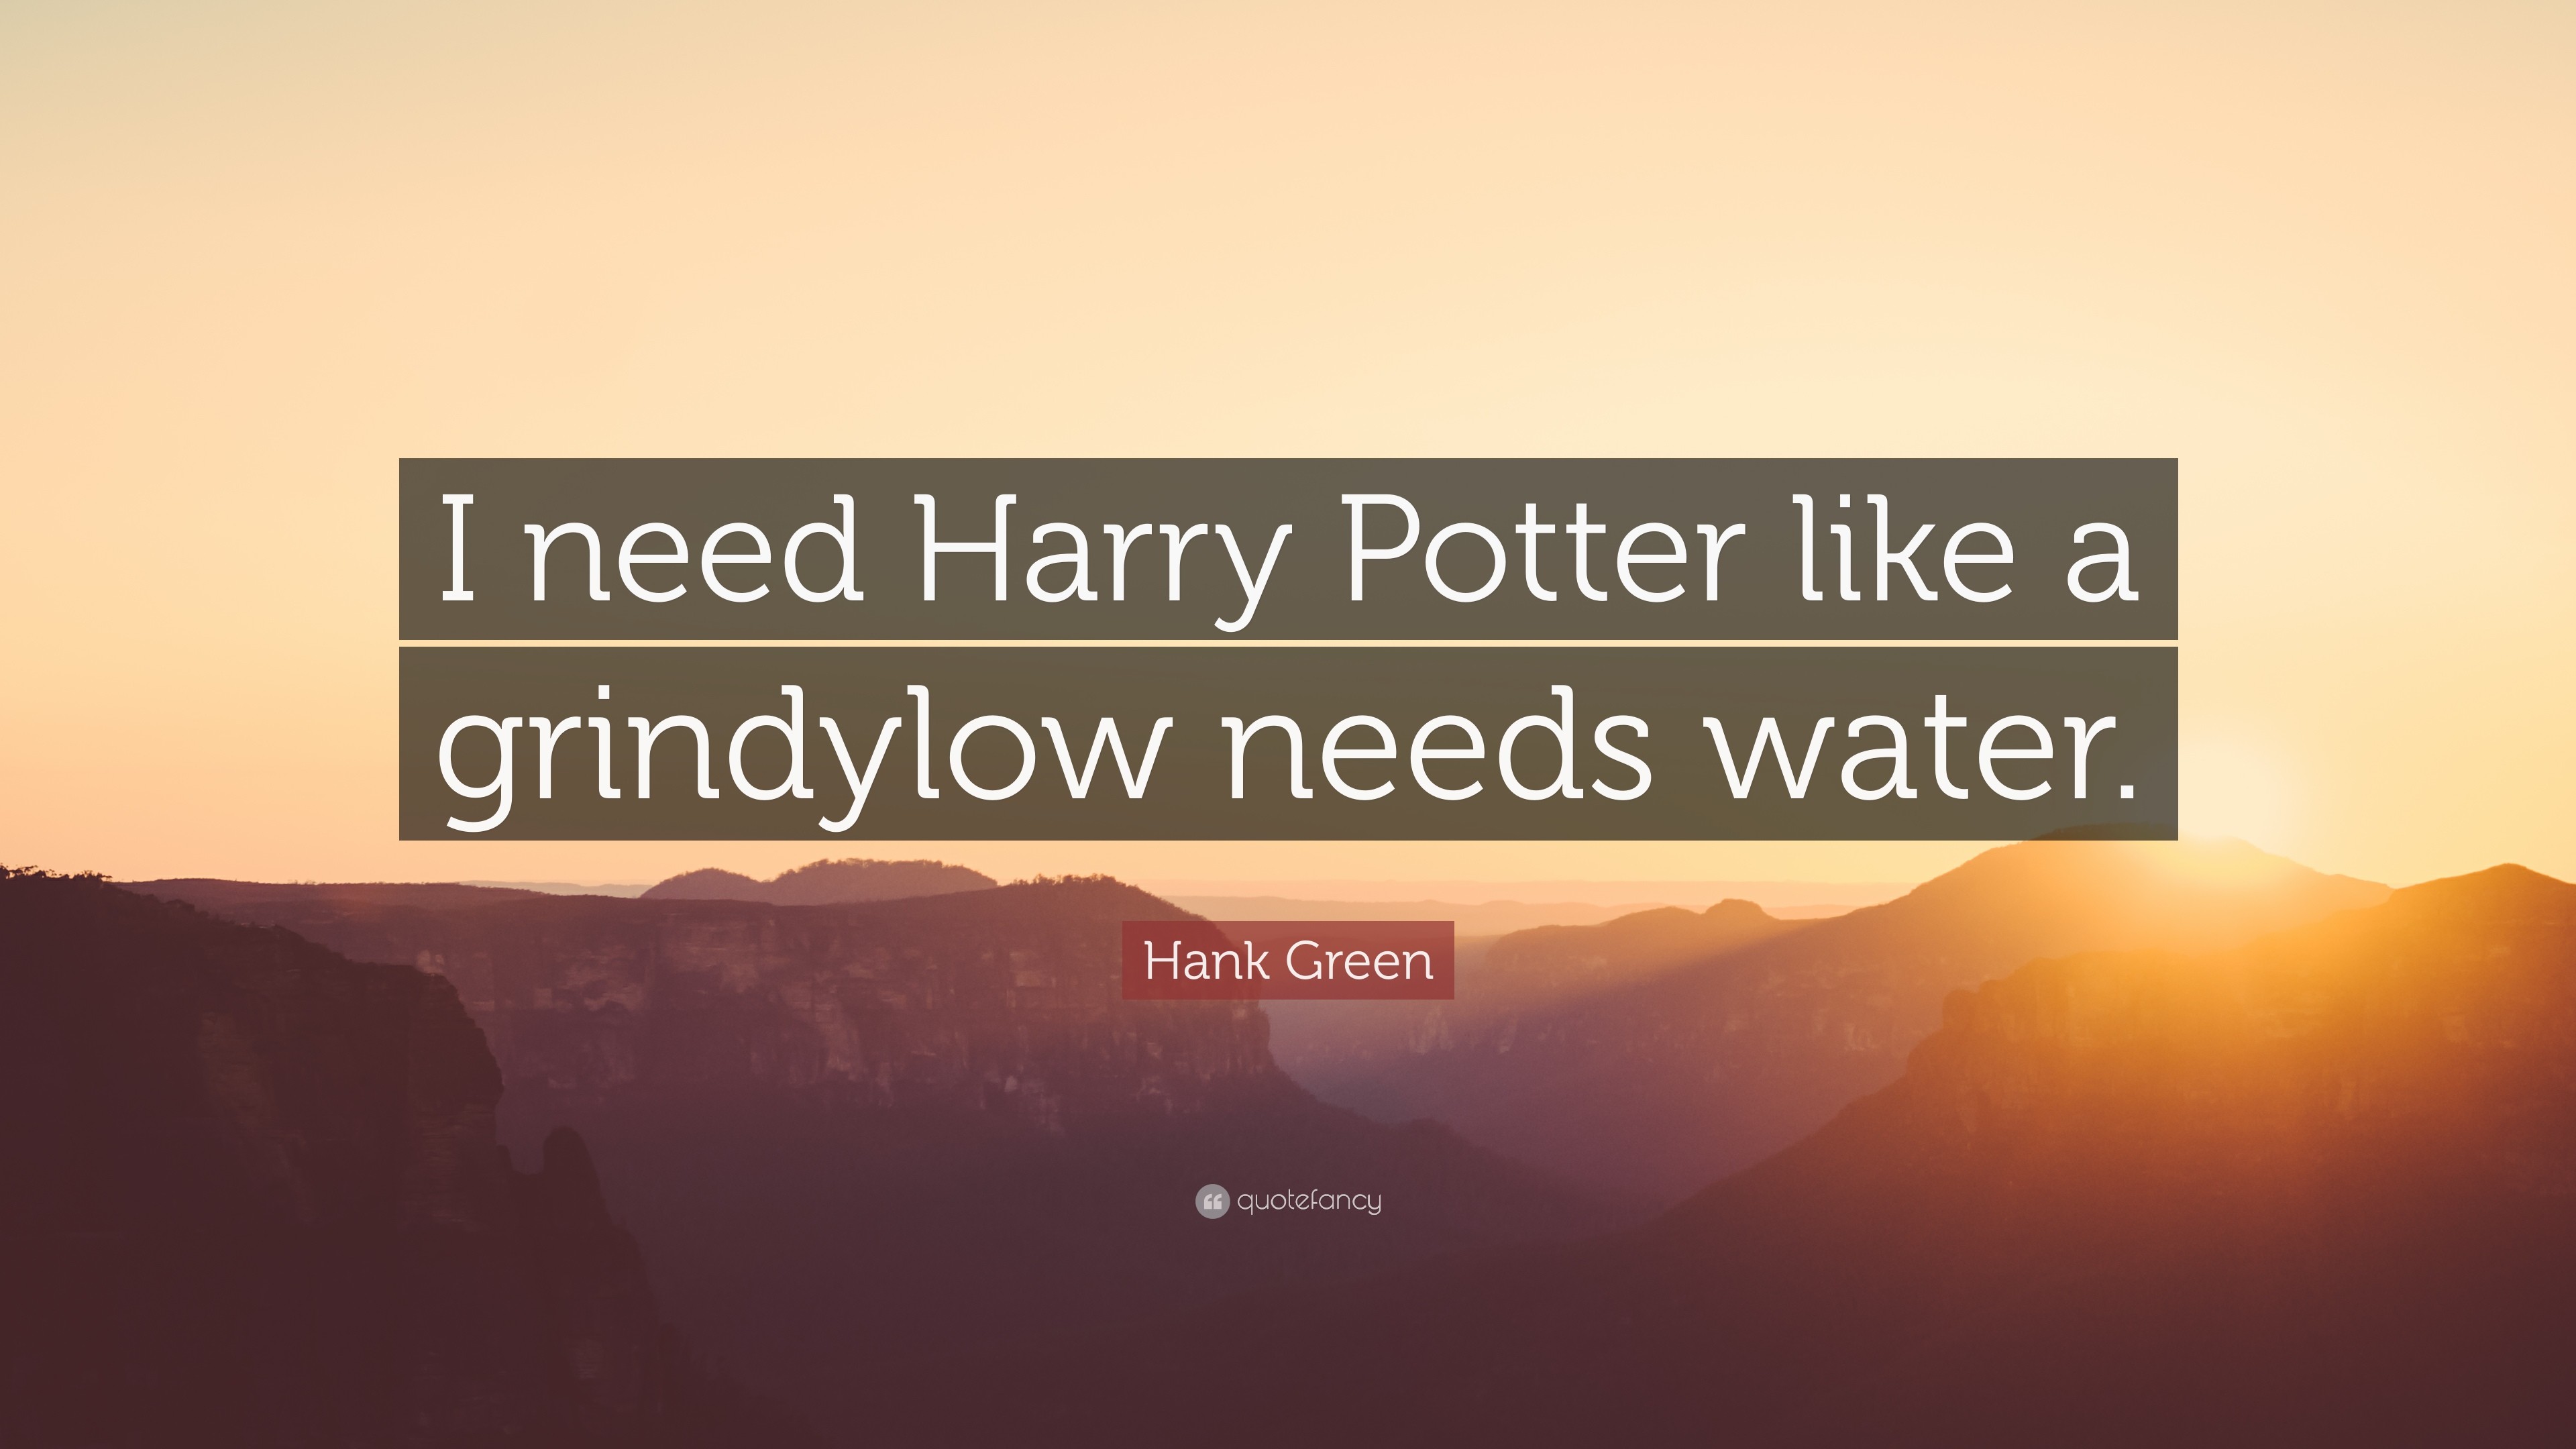 Hank Green Quote: “I need Harry Potter like a grindylow needs water.”